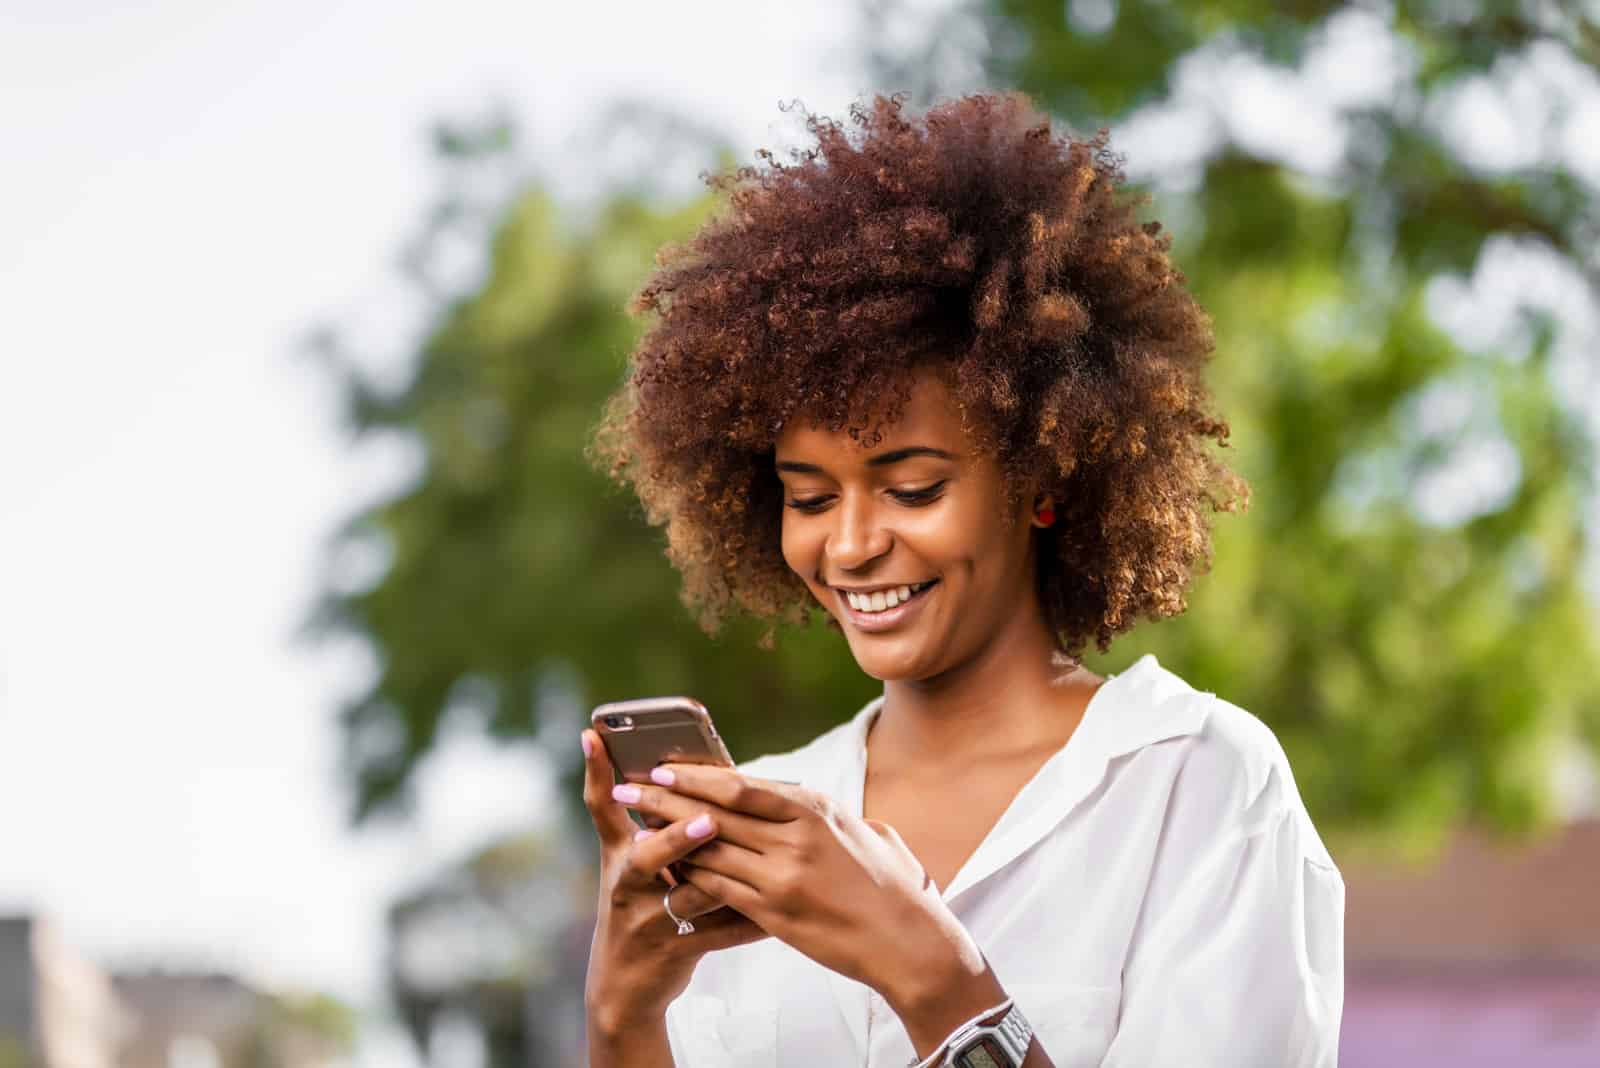 a smiling woman with frizzy hair holds a phone in her hand